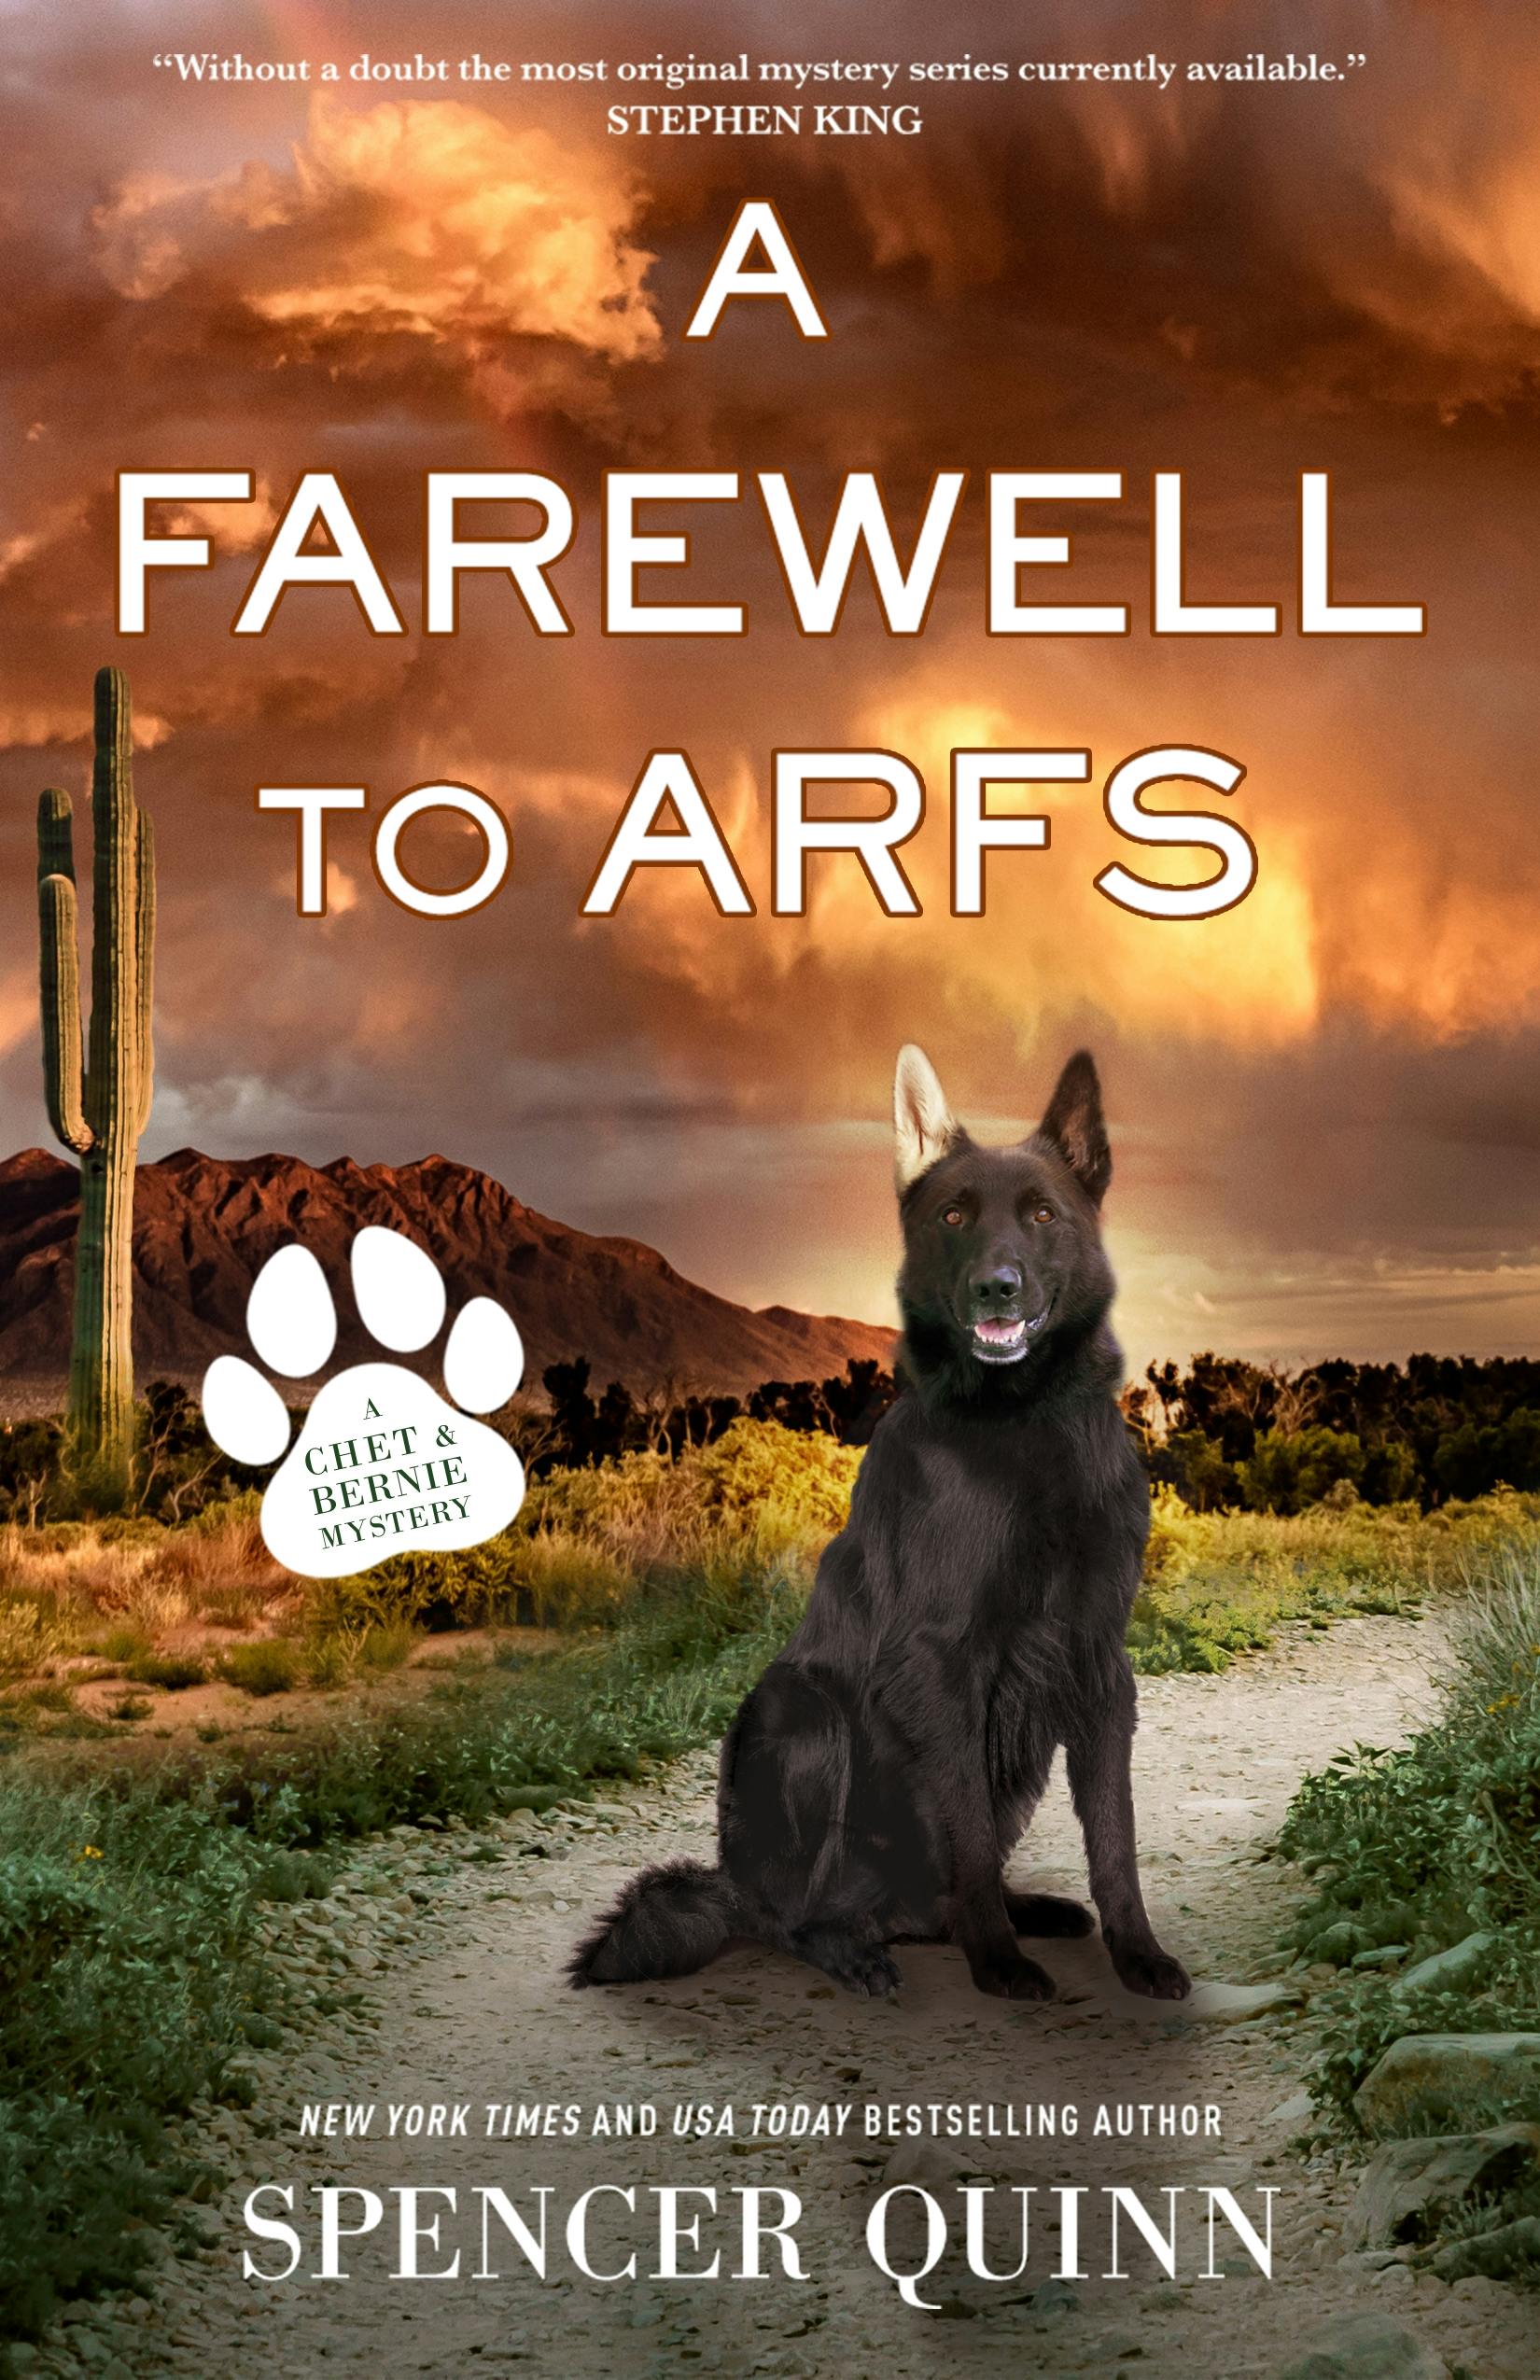 Cover for the book titled as: A Farewell to Arfs